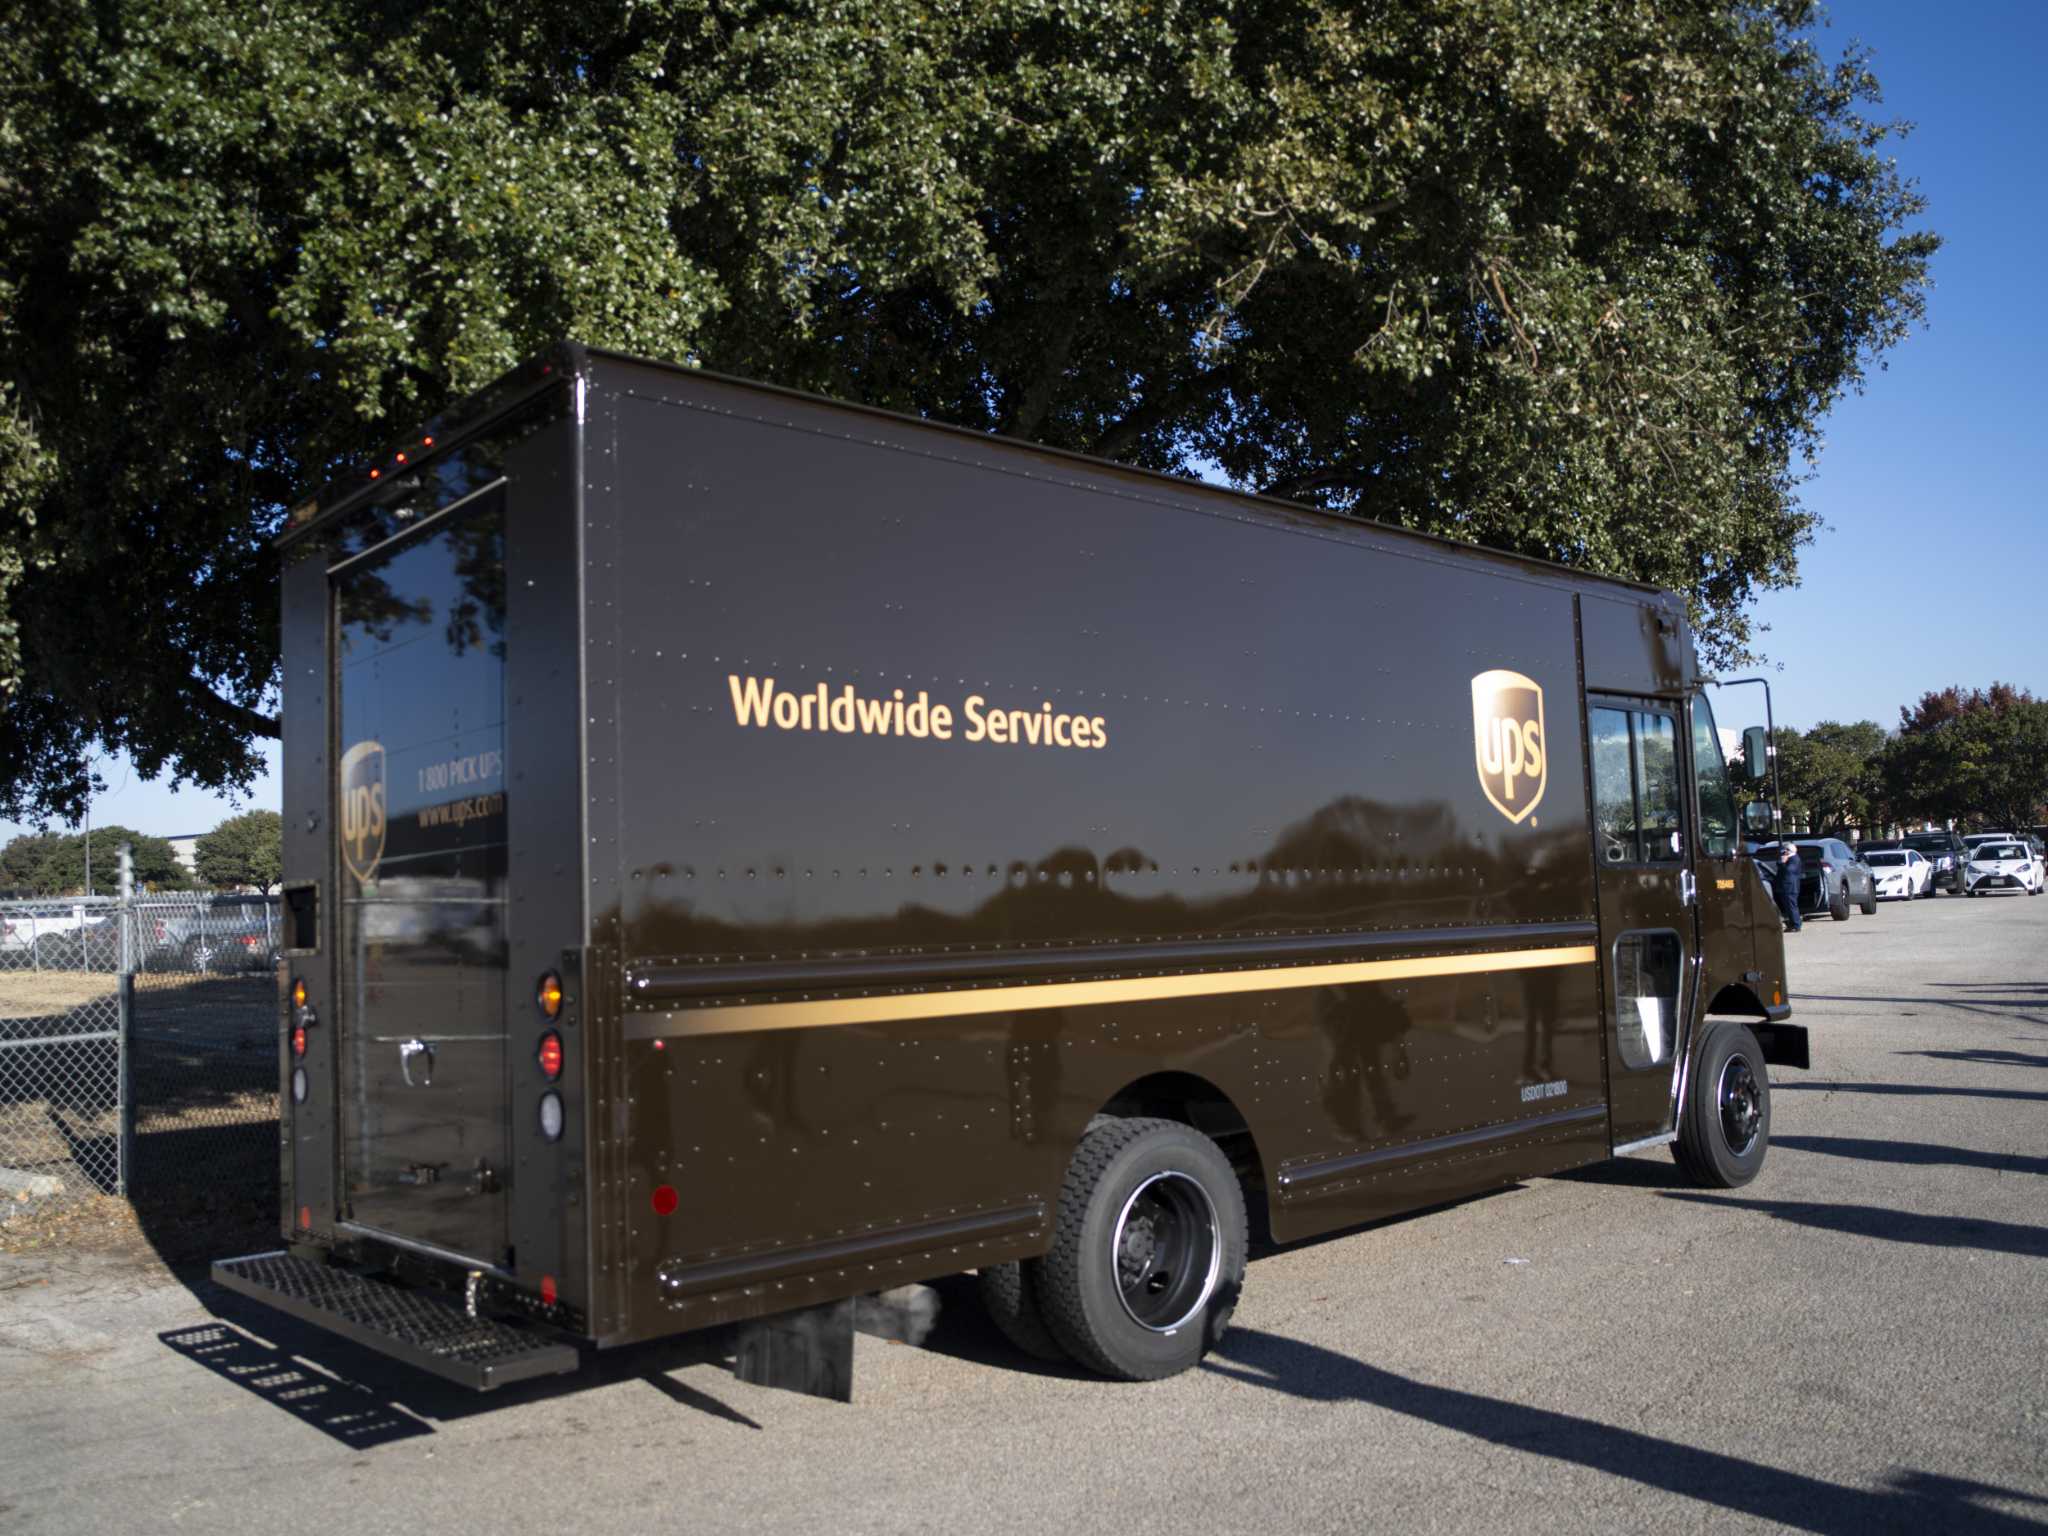 UPS hiring more than 3,000 seasonal workers in Houston to prepare for